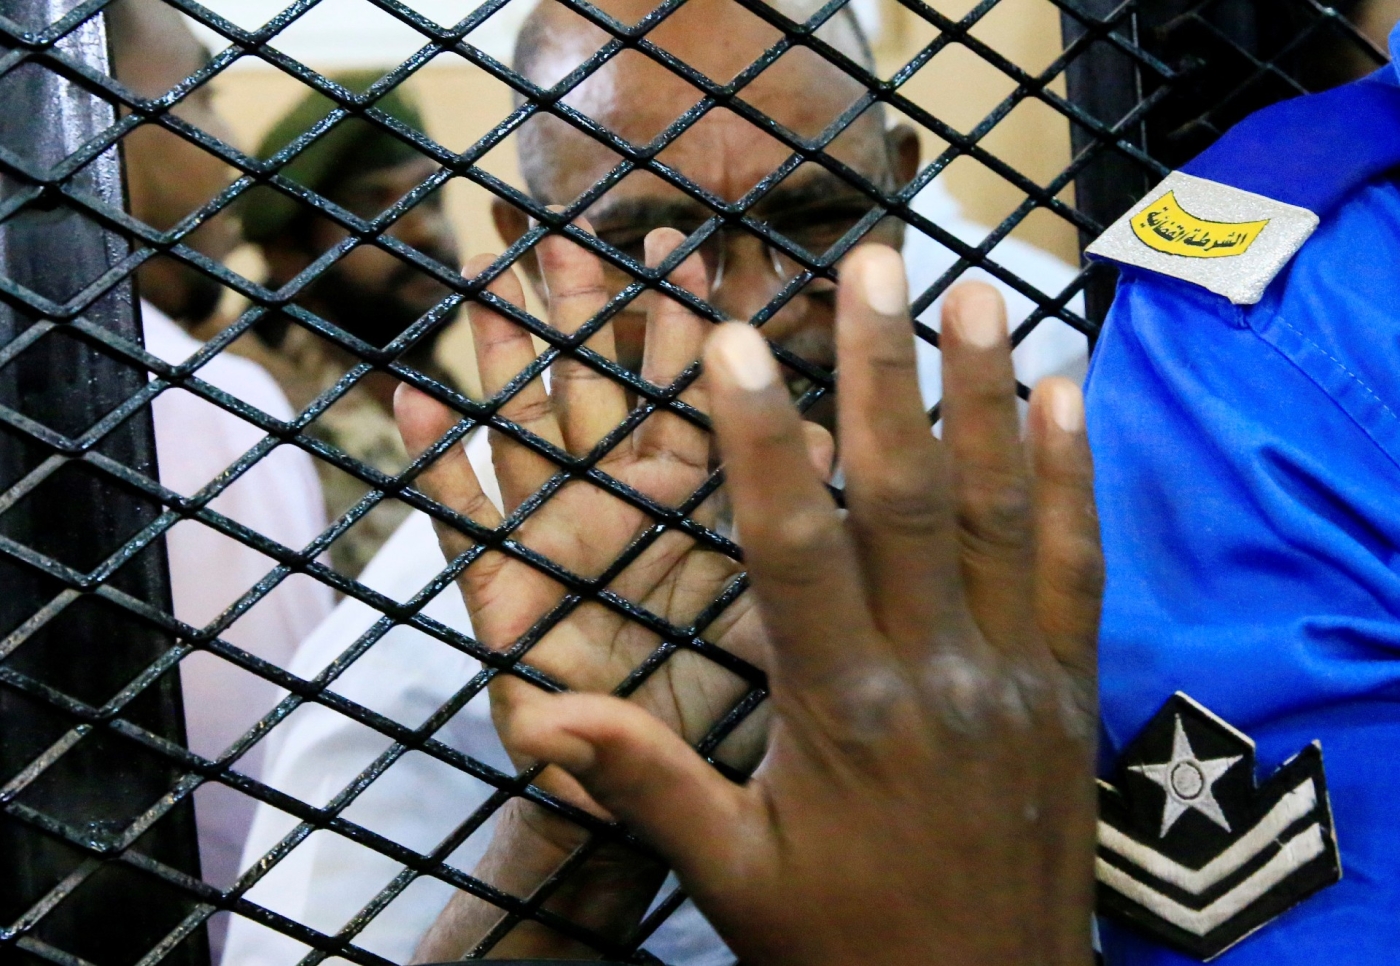 Omar al-Bashir greets a supporter from inside the defendant's cage during his trial in 2020 (Reuters)